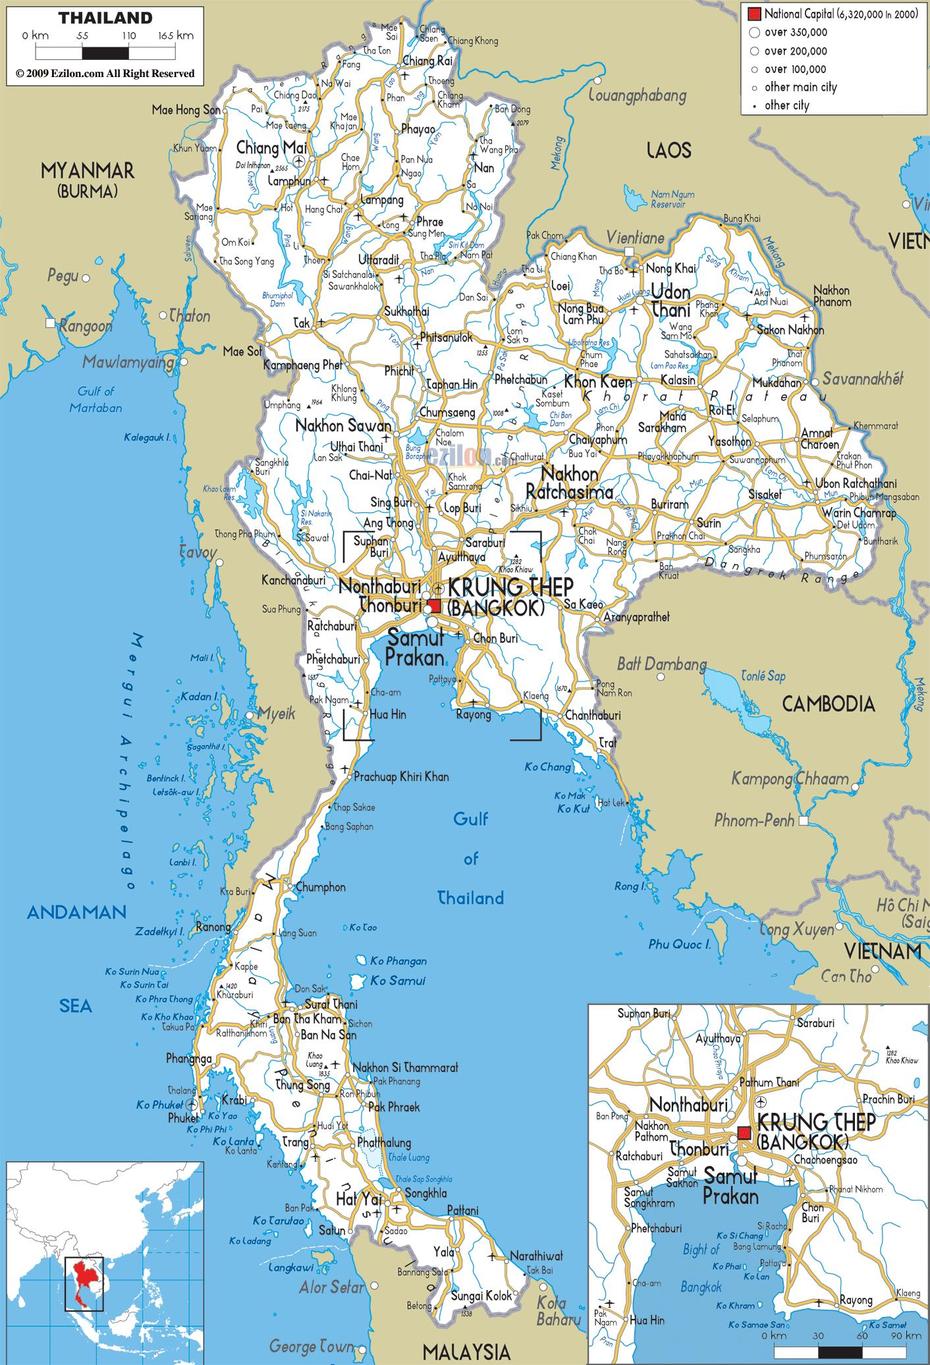 Map Of Thailand Image – Maps Of The World, Ban Phai, Thailand, Ban Phai, Thailand